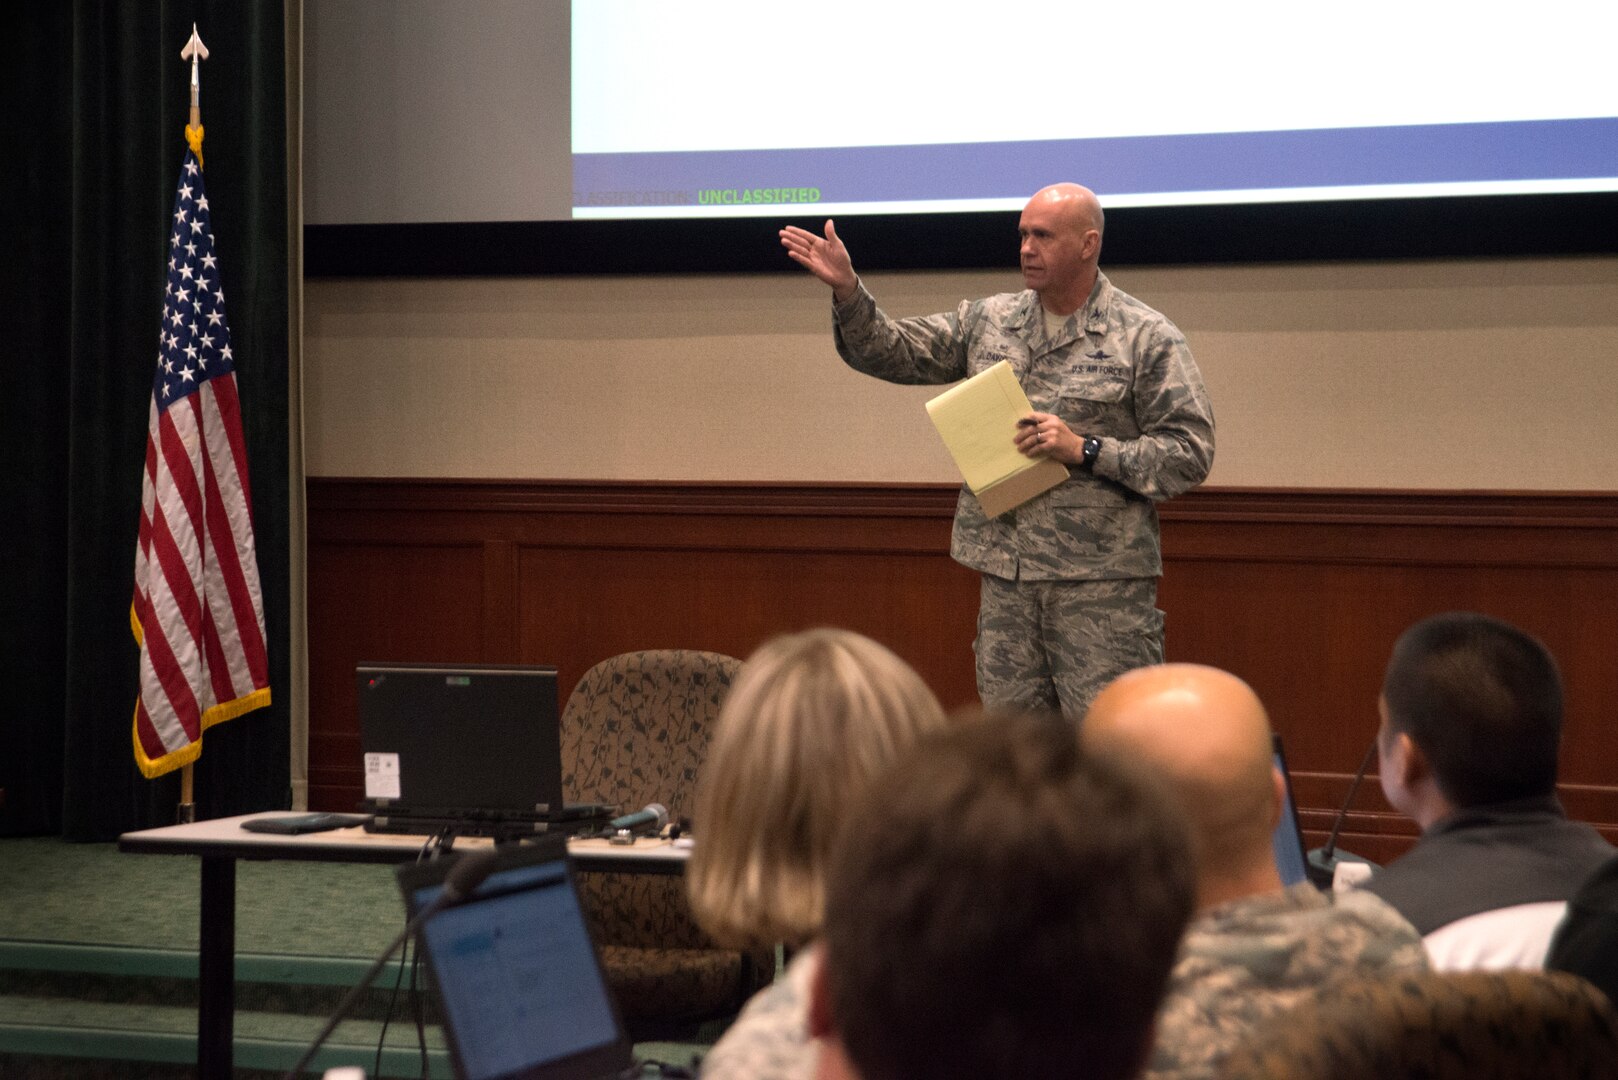 Col. Gregory Davis, 690th Cyberspace Operations Group commander, gives closing remarks at the inaugural Cybersecurity Foundry Course at MacDill Air Force Base, Fla., March 14, 2018. Course instructors taught 100 cyberspace students various cybersecurity functions, processes, procedures and data analysis skills to further their ability to secure the Air Force Network. (U.S. Air Force photo by Airman 1st Class Scott Warner)